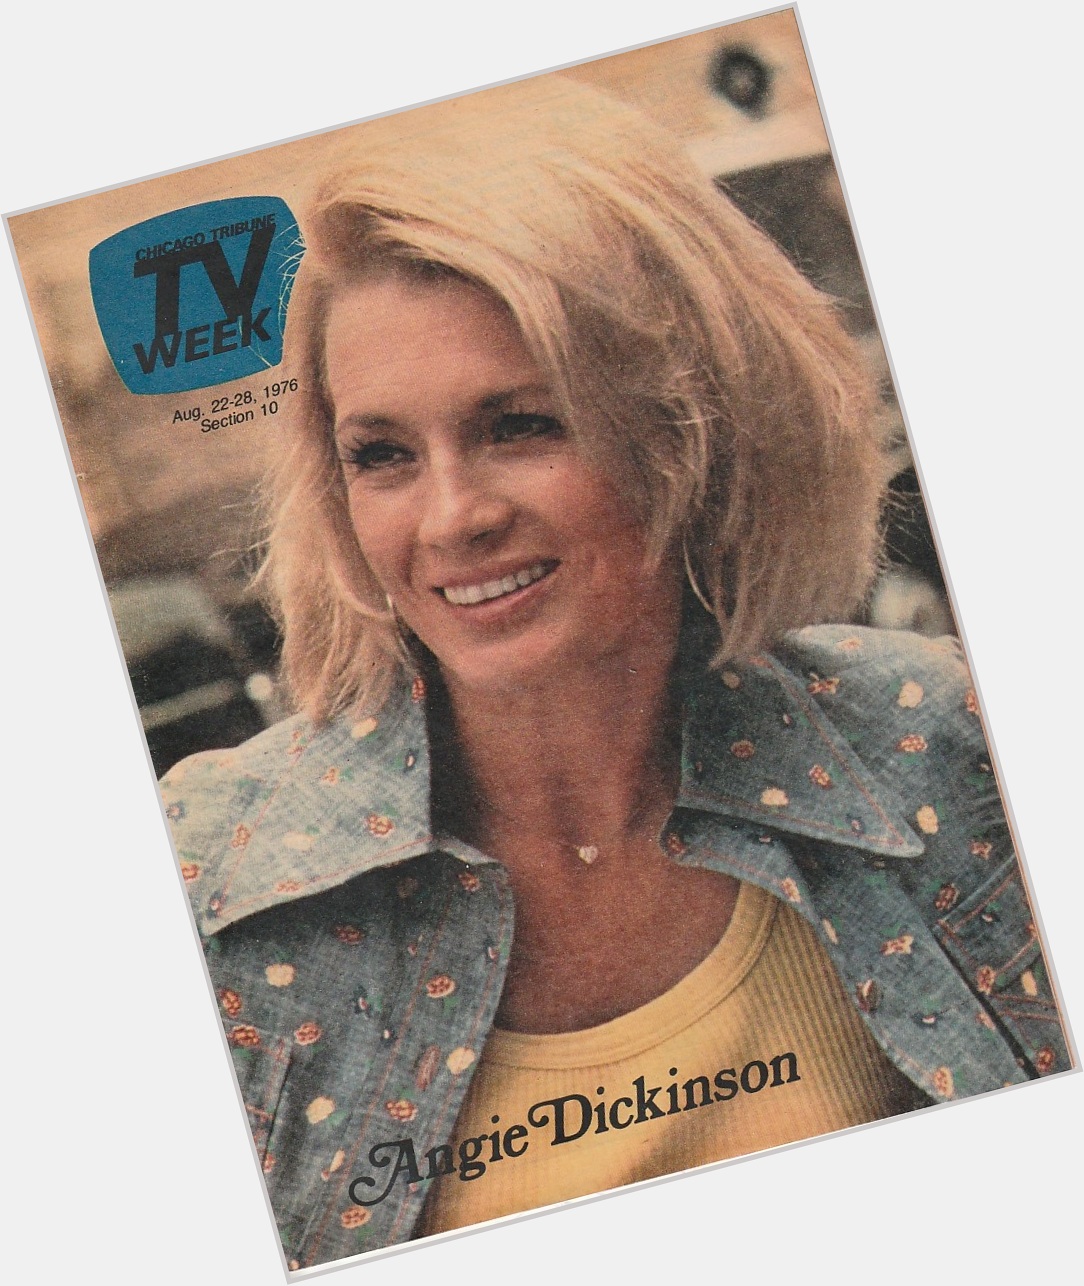 Happy Birthday to Angie Dickinson, born on this date in 1931.
Tribune TV Week and Daily News TV - 1976 and 1978 